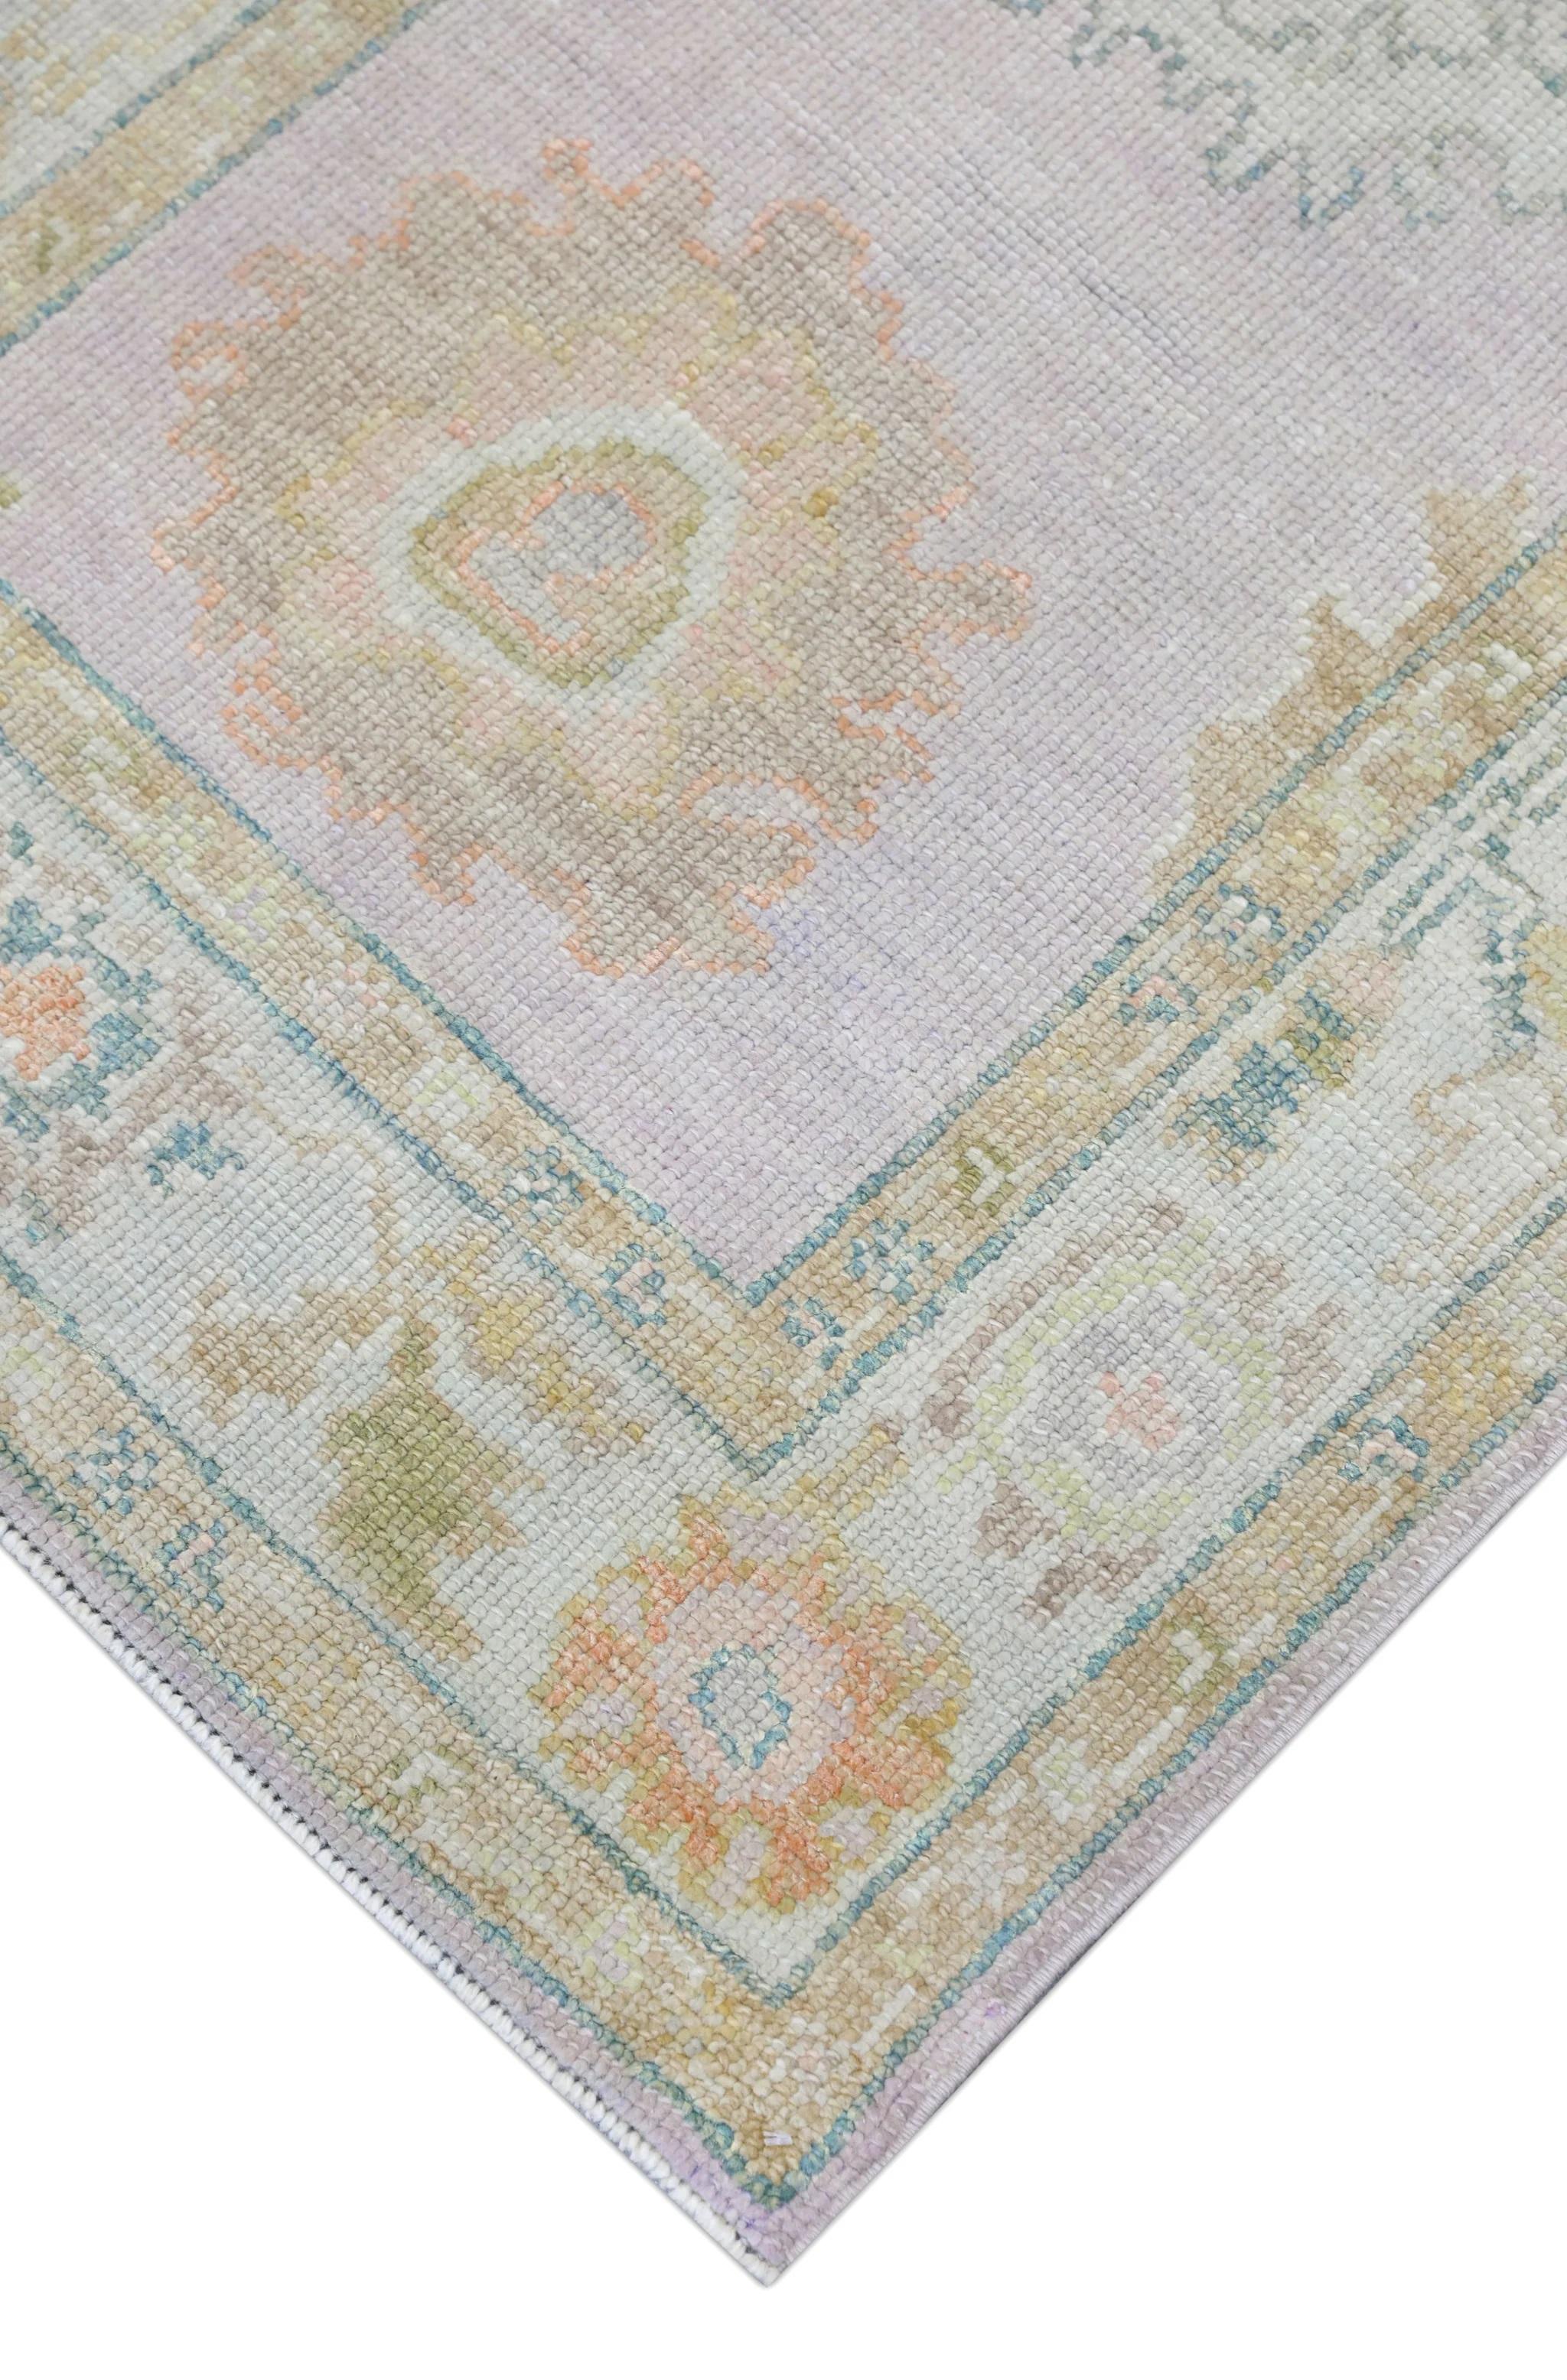 Handwoven Wool Turkish Oushak Rug with Pastel Colors and Floral Design 3' x 6'8